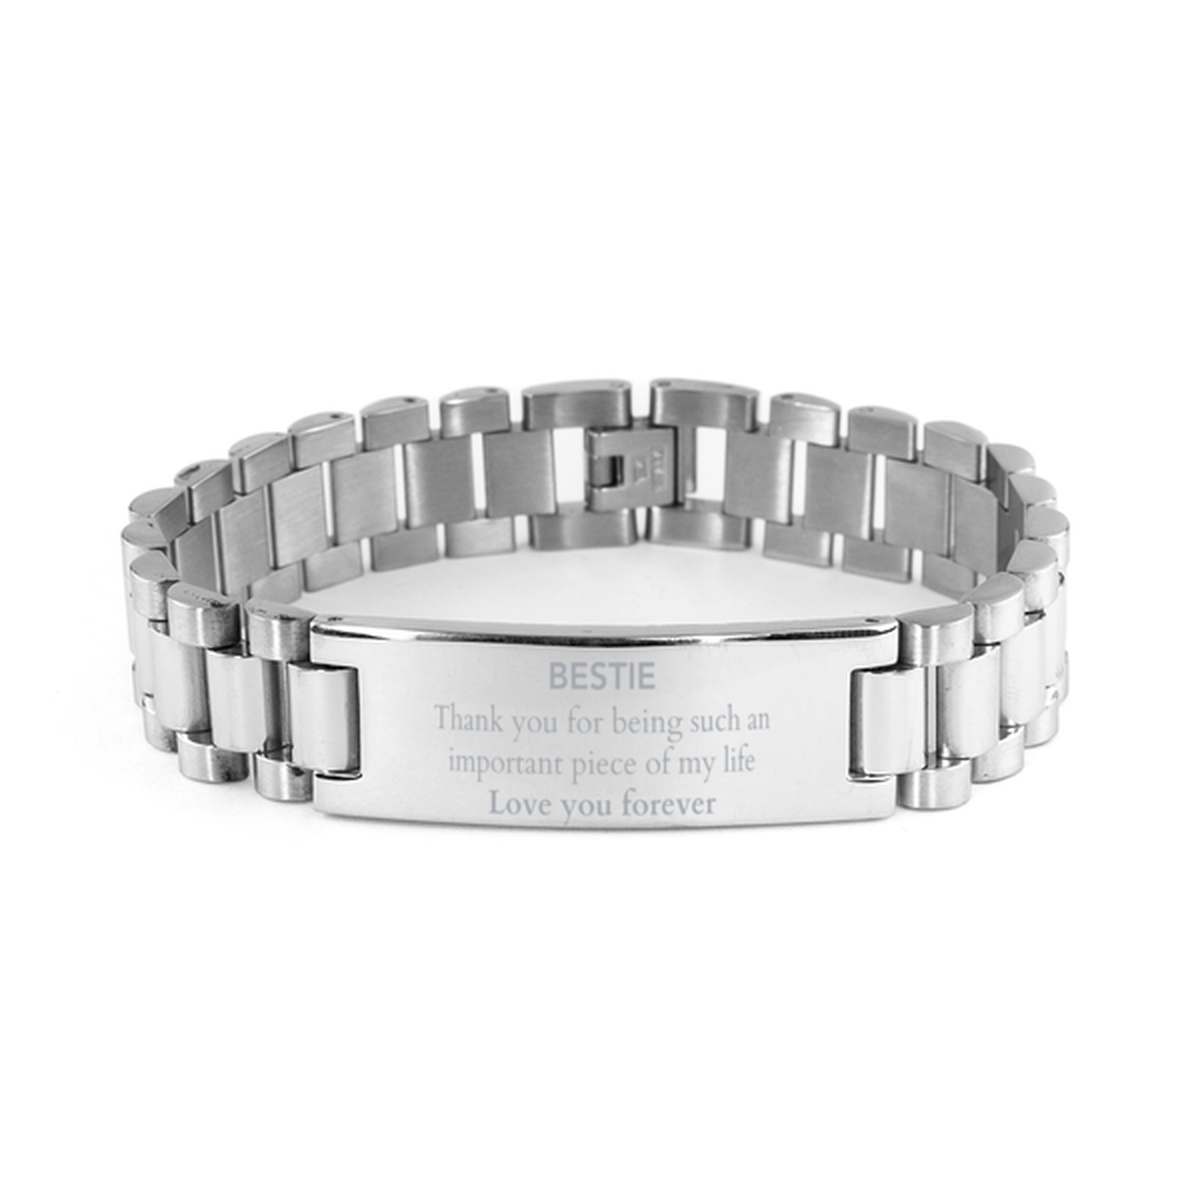 Appropriate Bestie Ladder Stainless Steel Bracelet Epic Birthday Gifts for Bestie Thank you for being such an important piece of my life Bestie Christmas Mothers Fathers Day